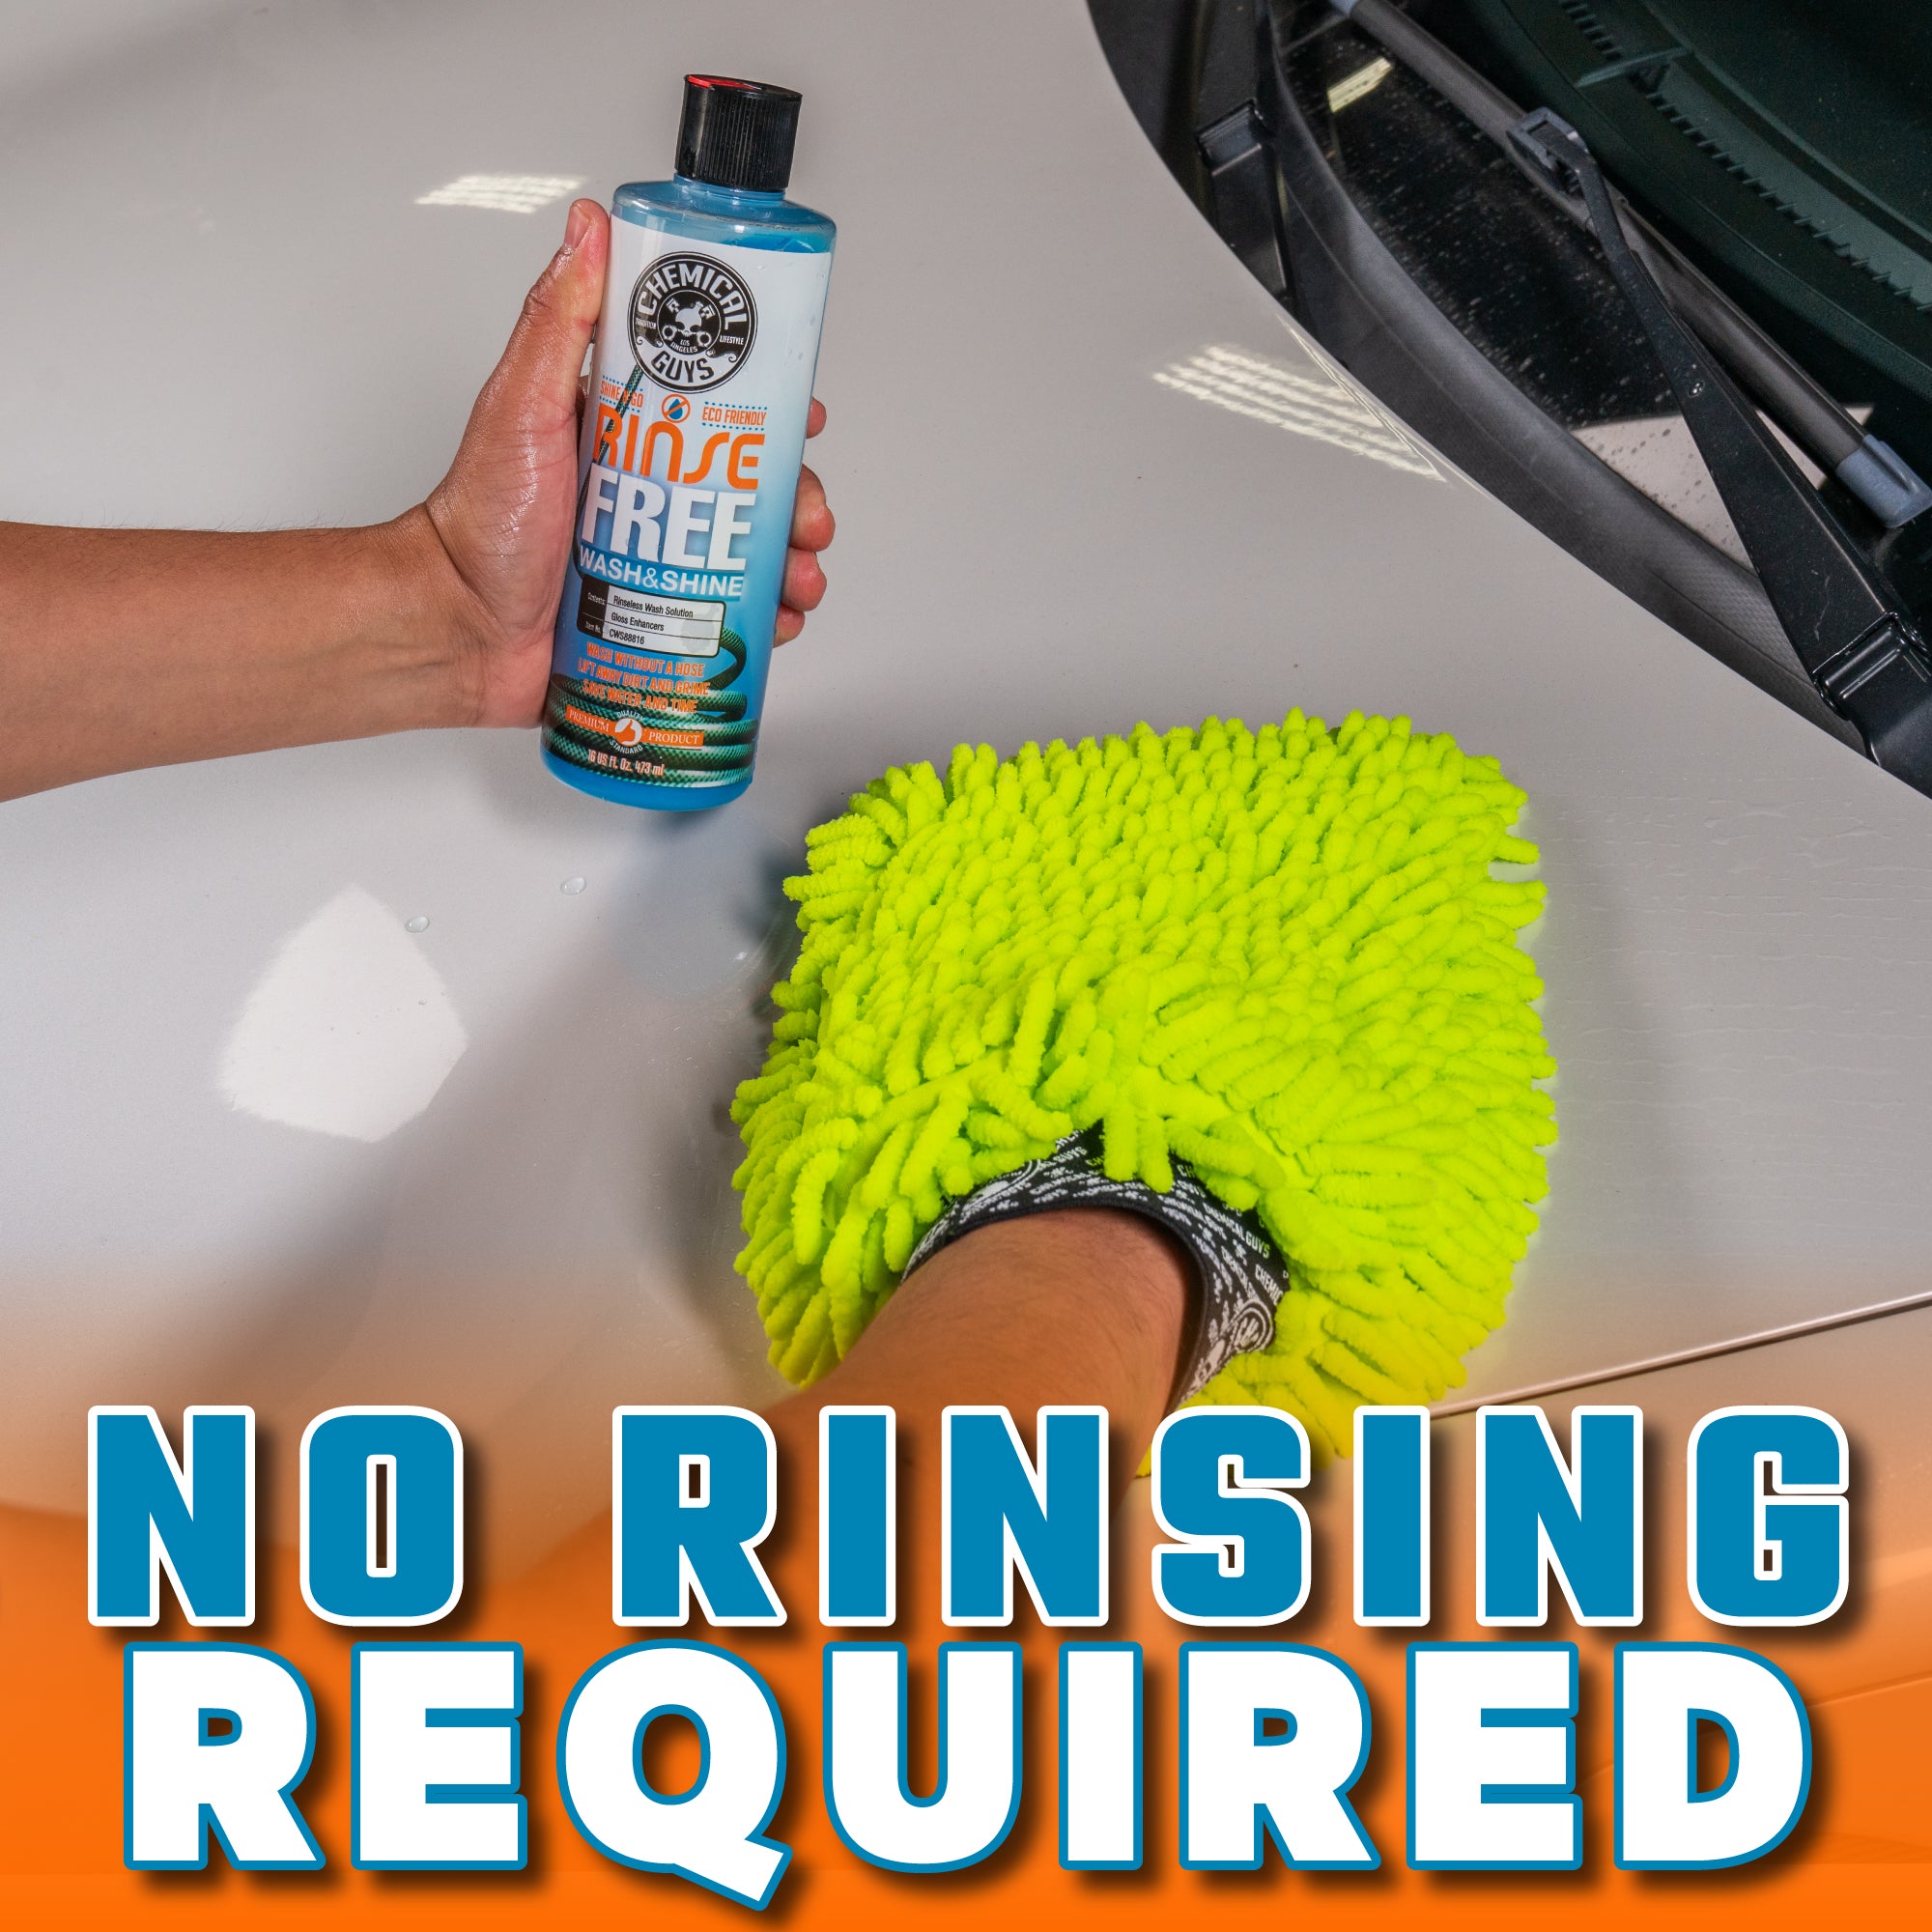 Rinse Free Wash And Shine Complete Hoseless Car Wash | Chemical Guys